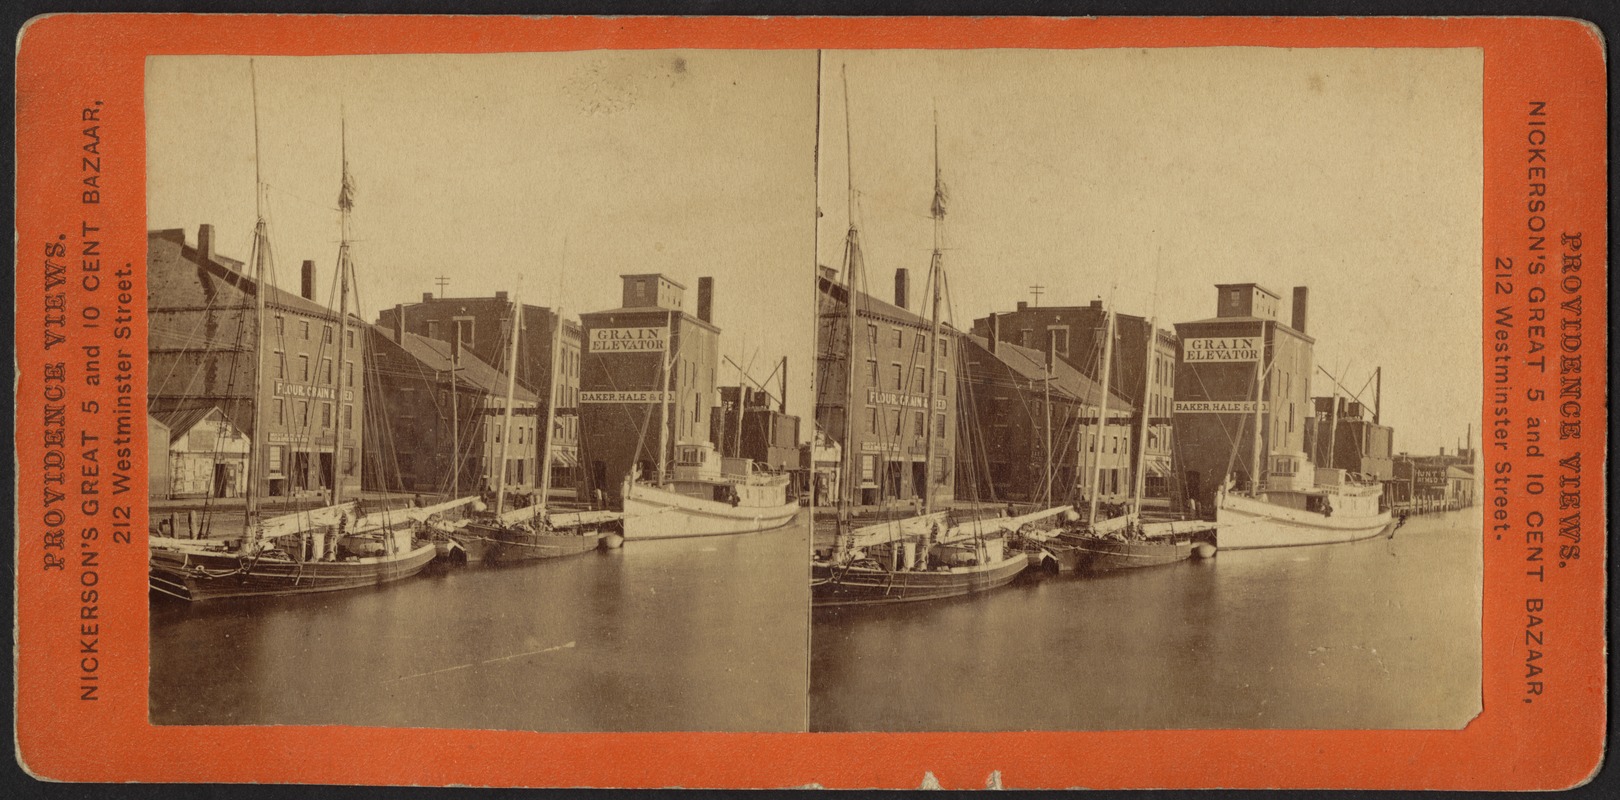 Three boats moored to a wharf in Providence